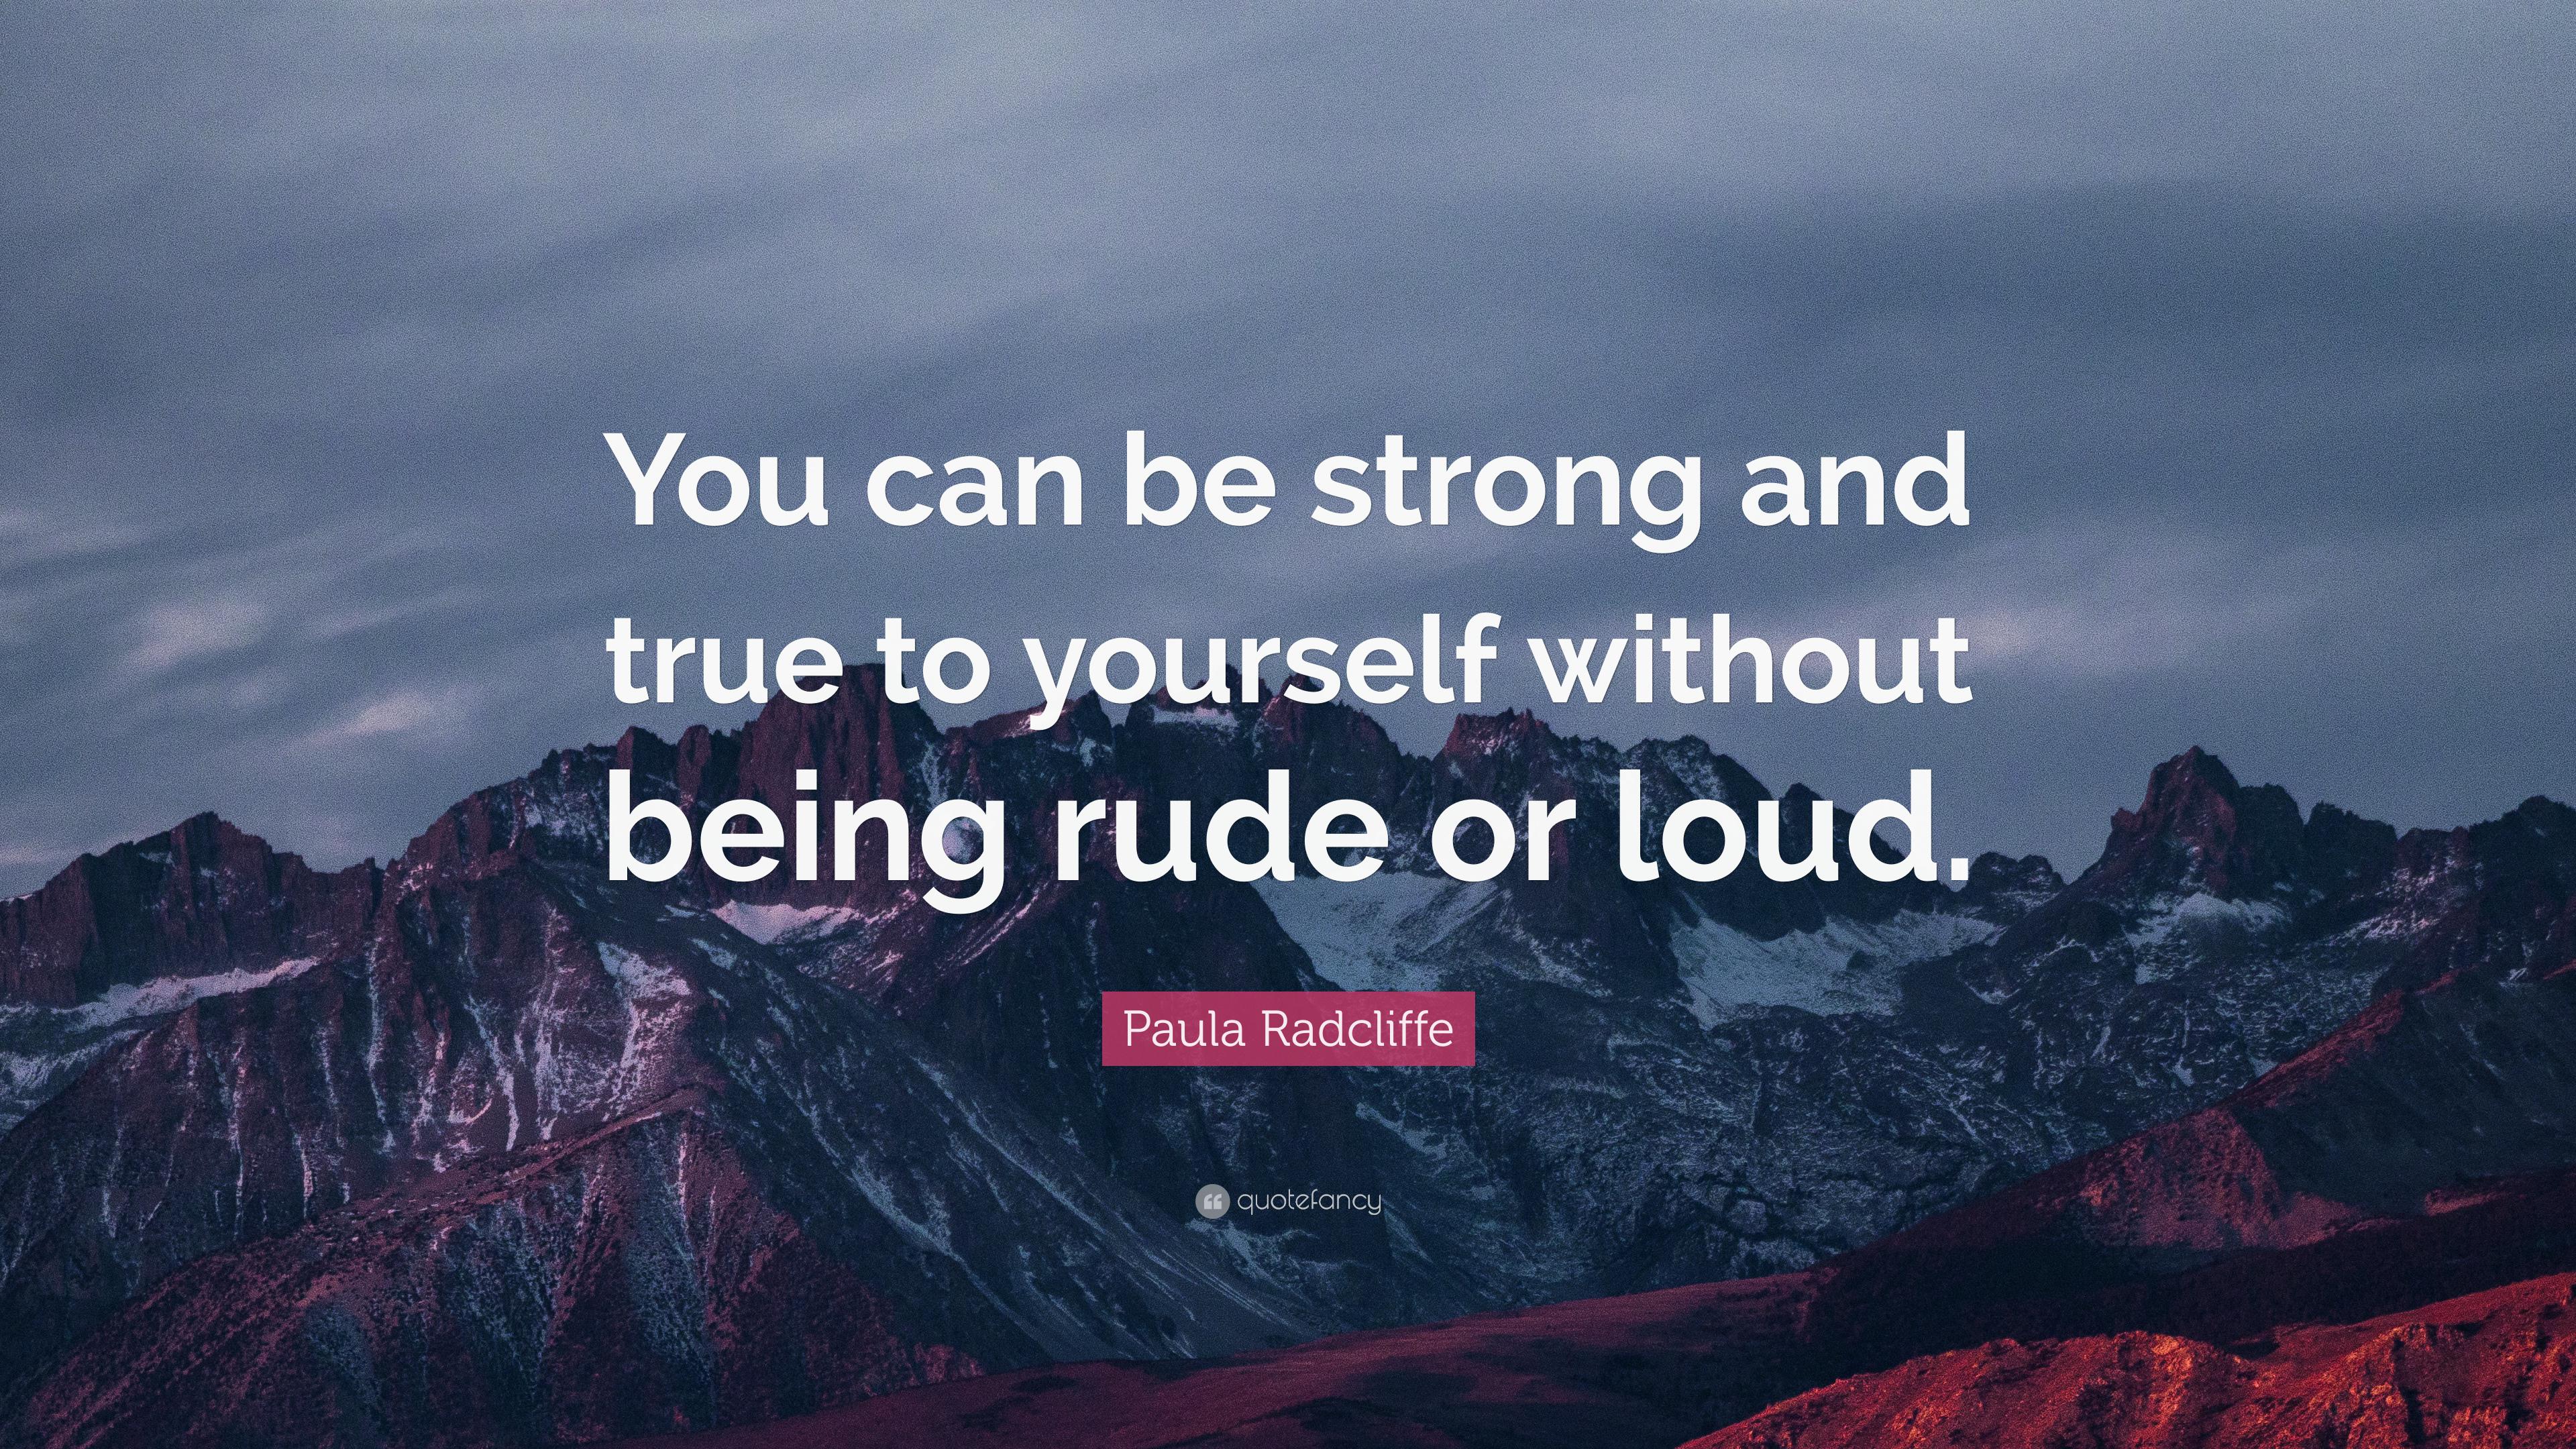 Paula Radcliffe Quote: “You can be strong and true to